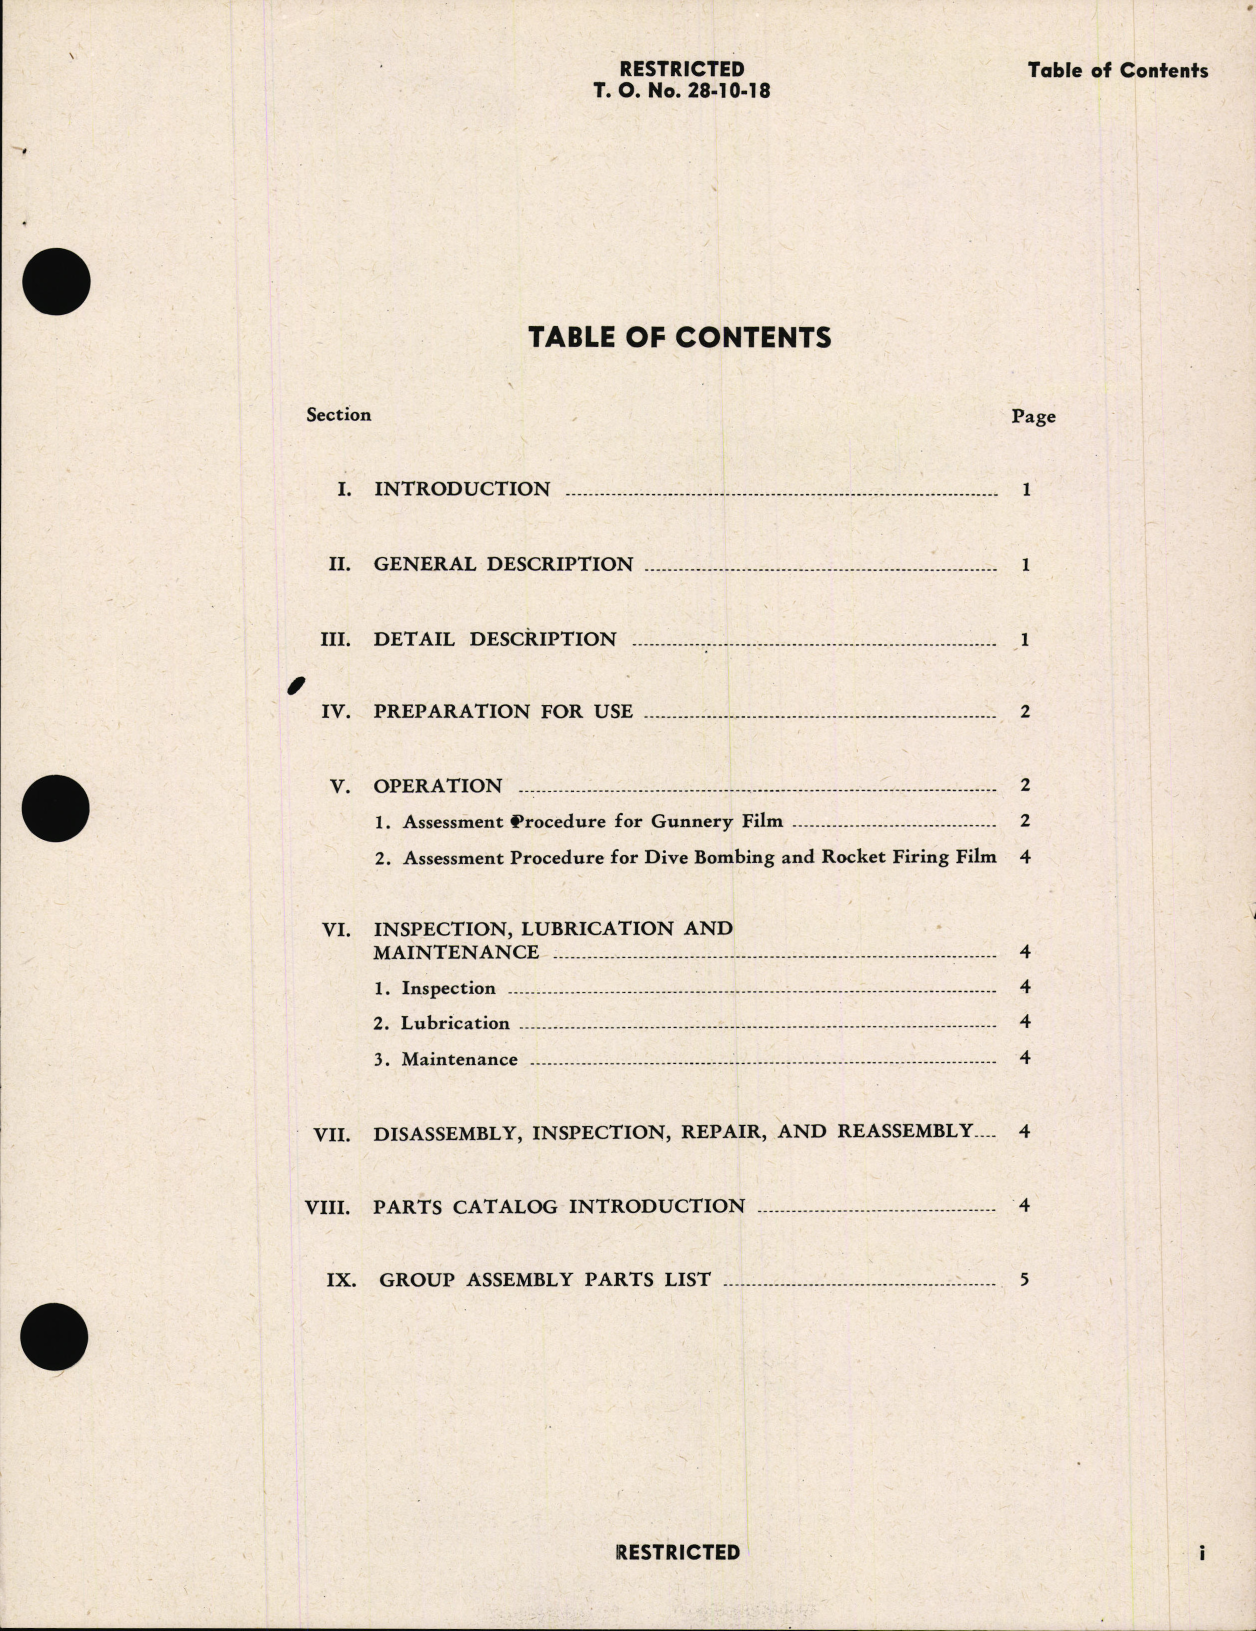 Sample page 3 from AirCorps Library document: Operation, Service and Overhaul Instructions with Parts Catalog for Film Assessing Kit Type W-2